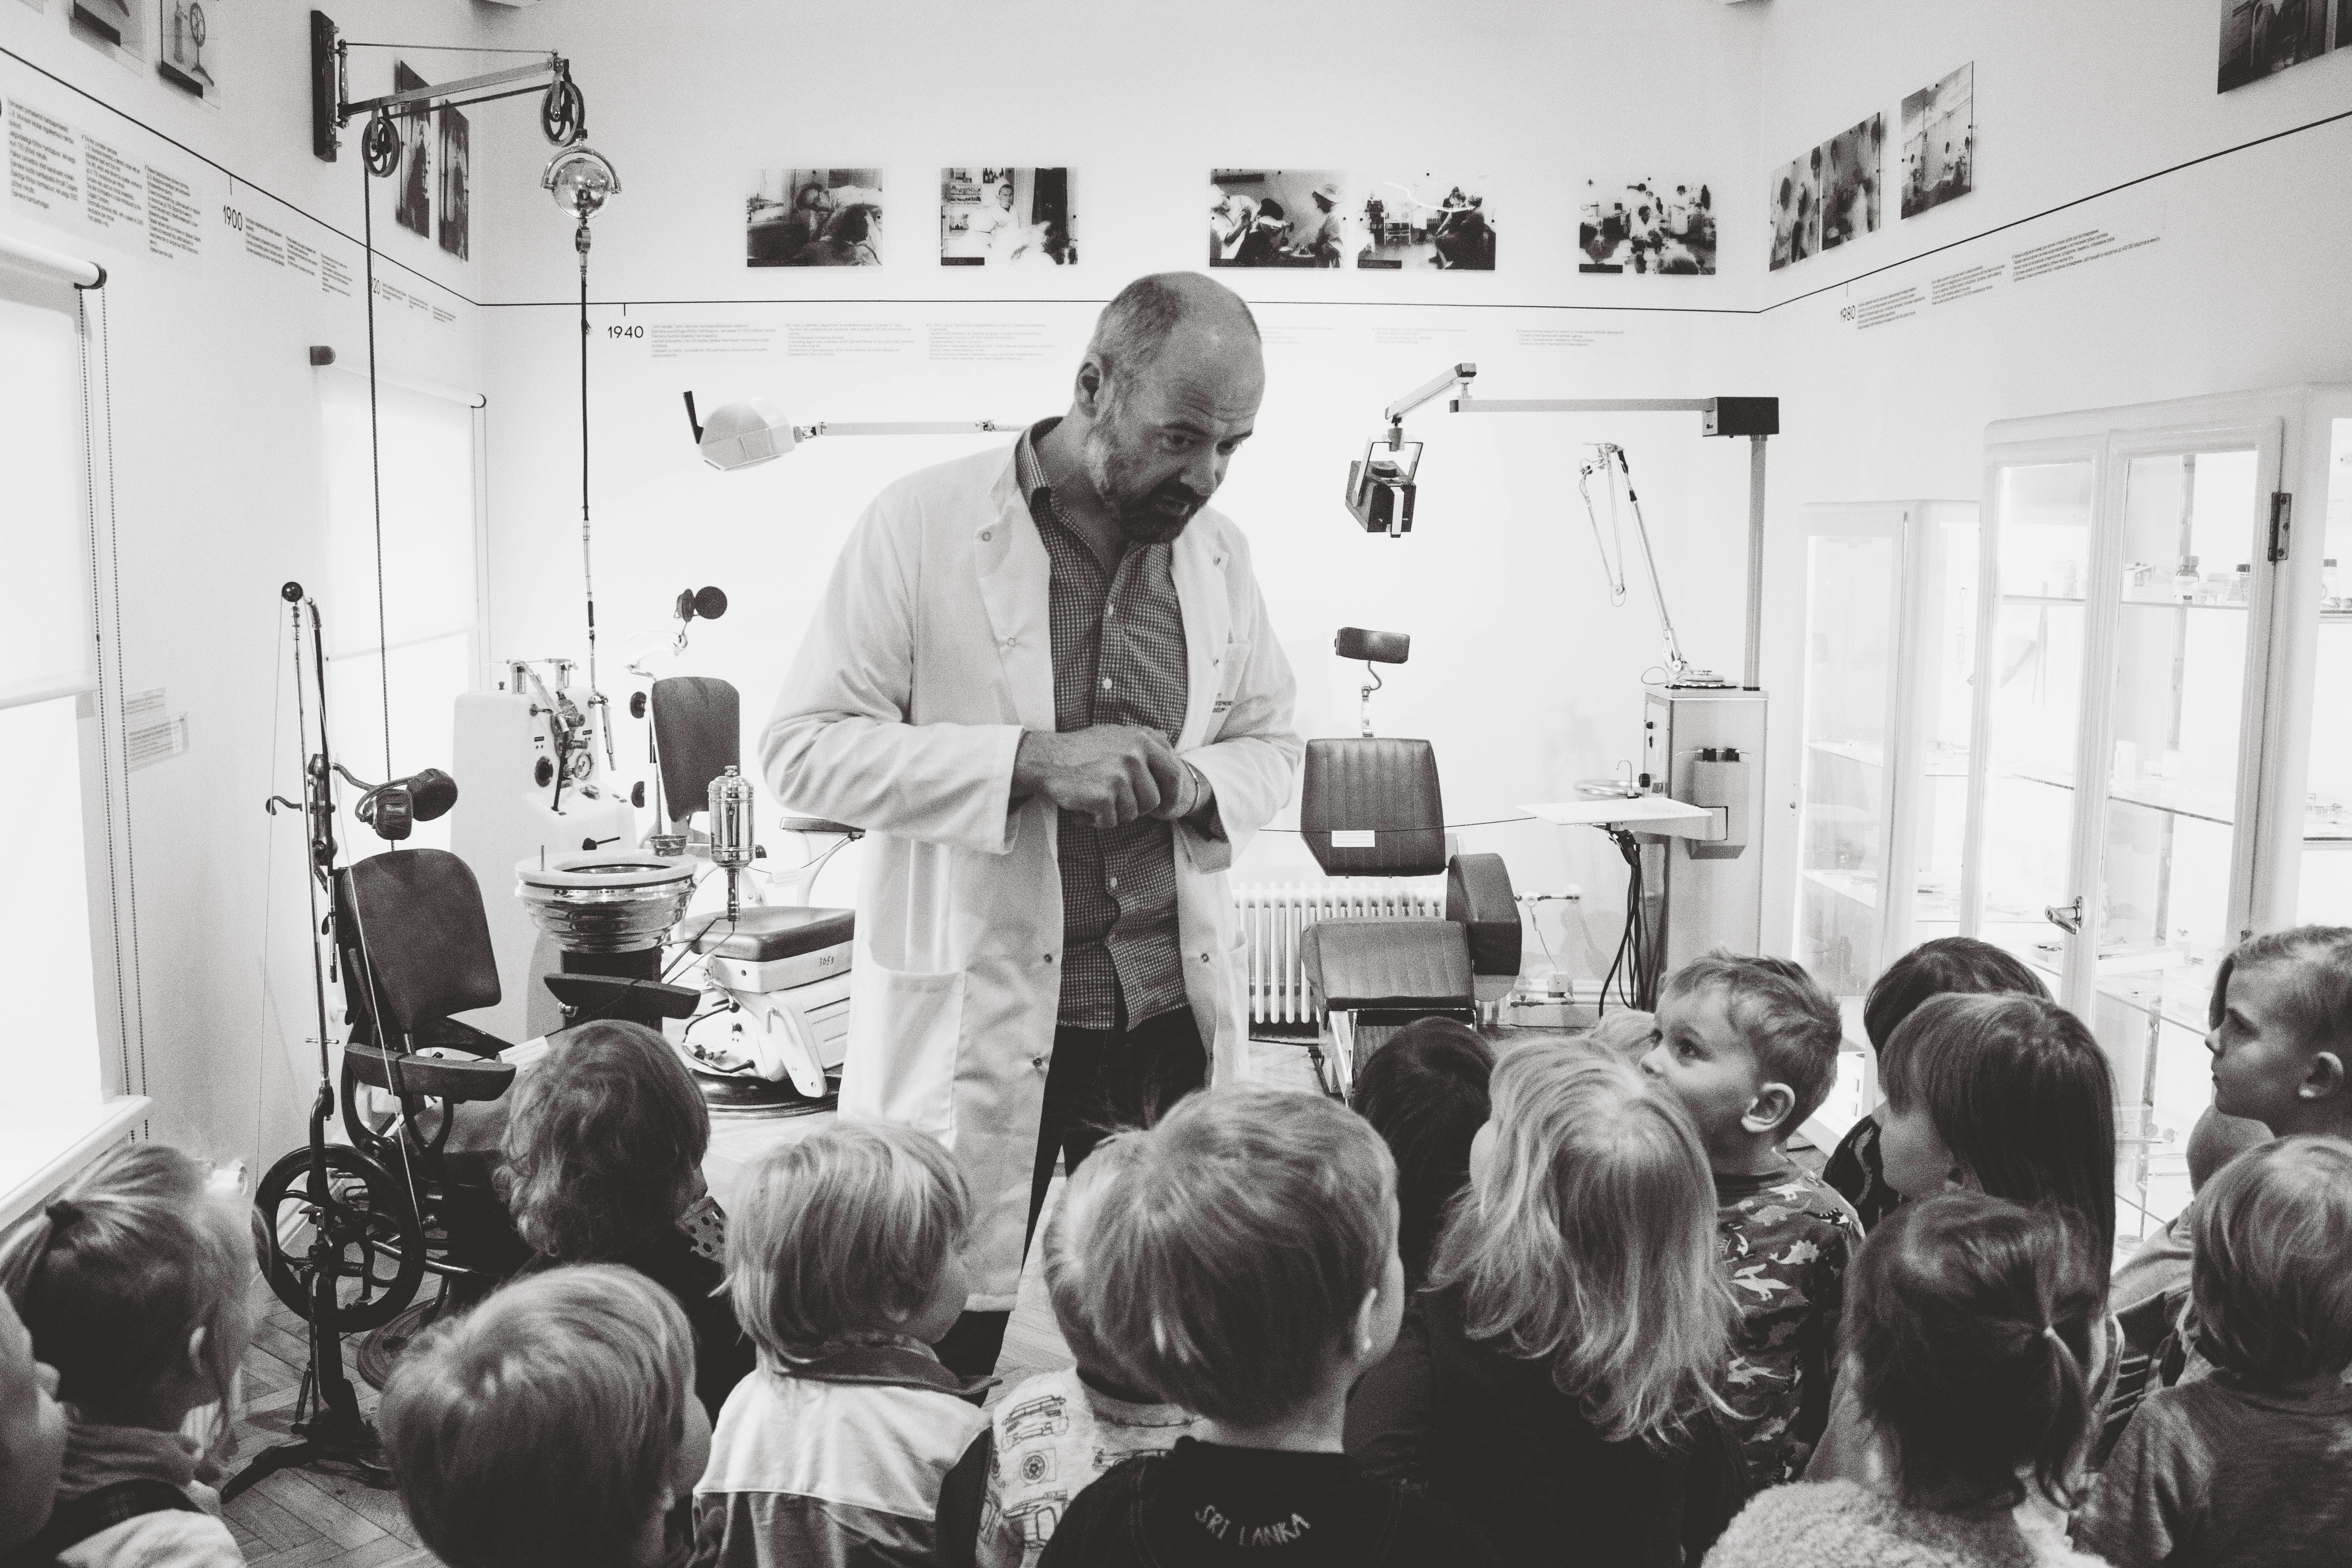 Man in lab coat lecturing to children in a medical setting.